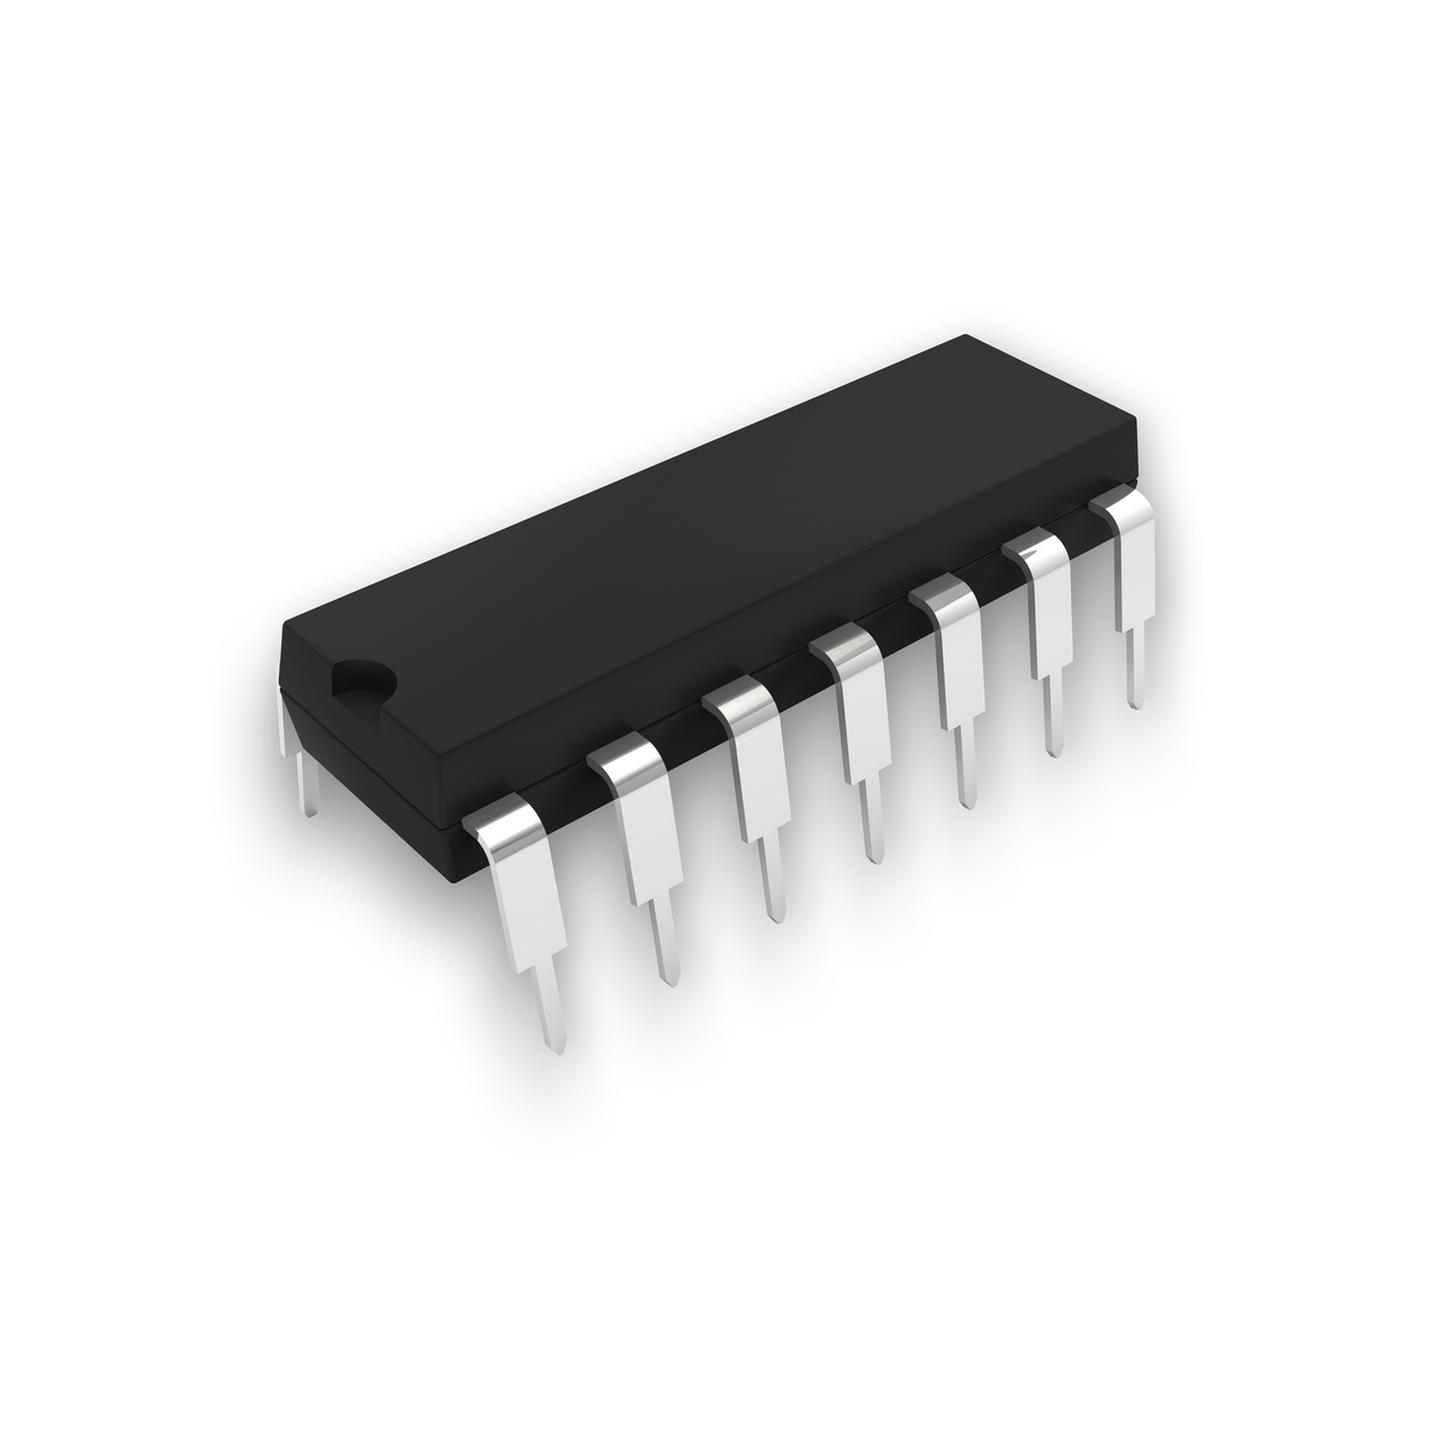 7407 TTL Hex Buffer IC with 30 V Open Collector output